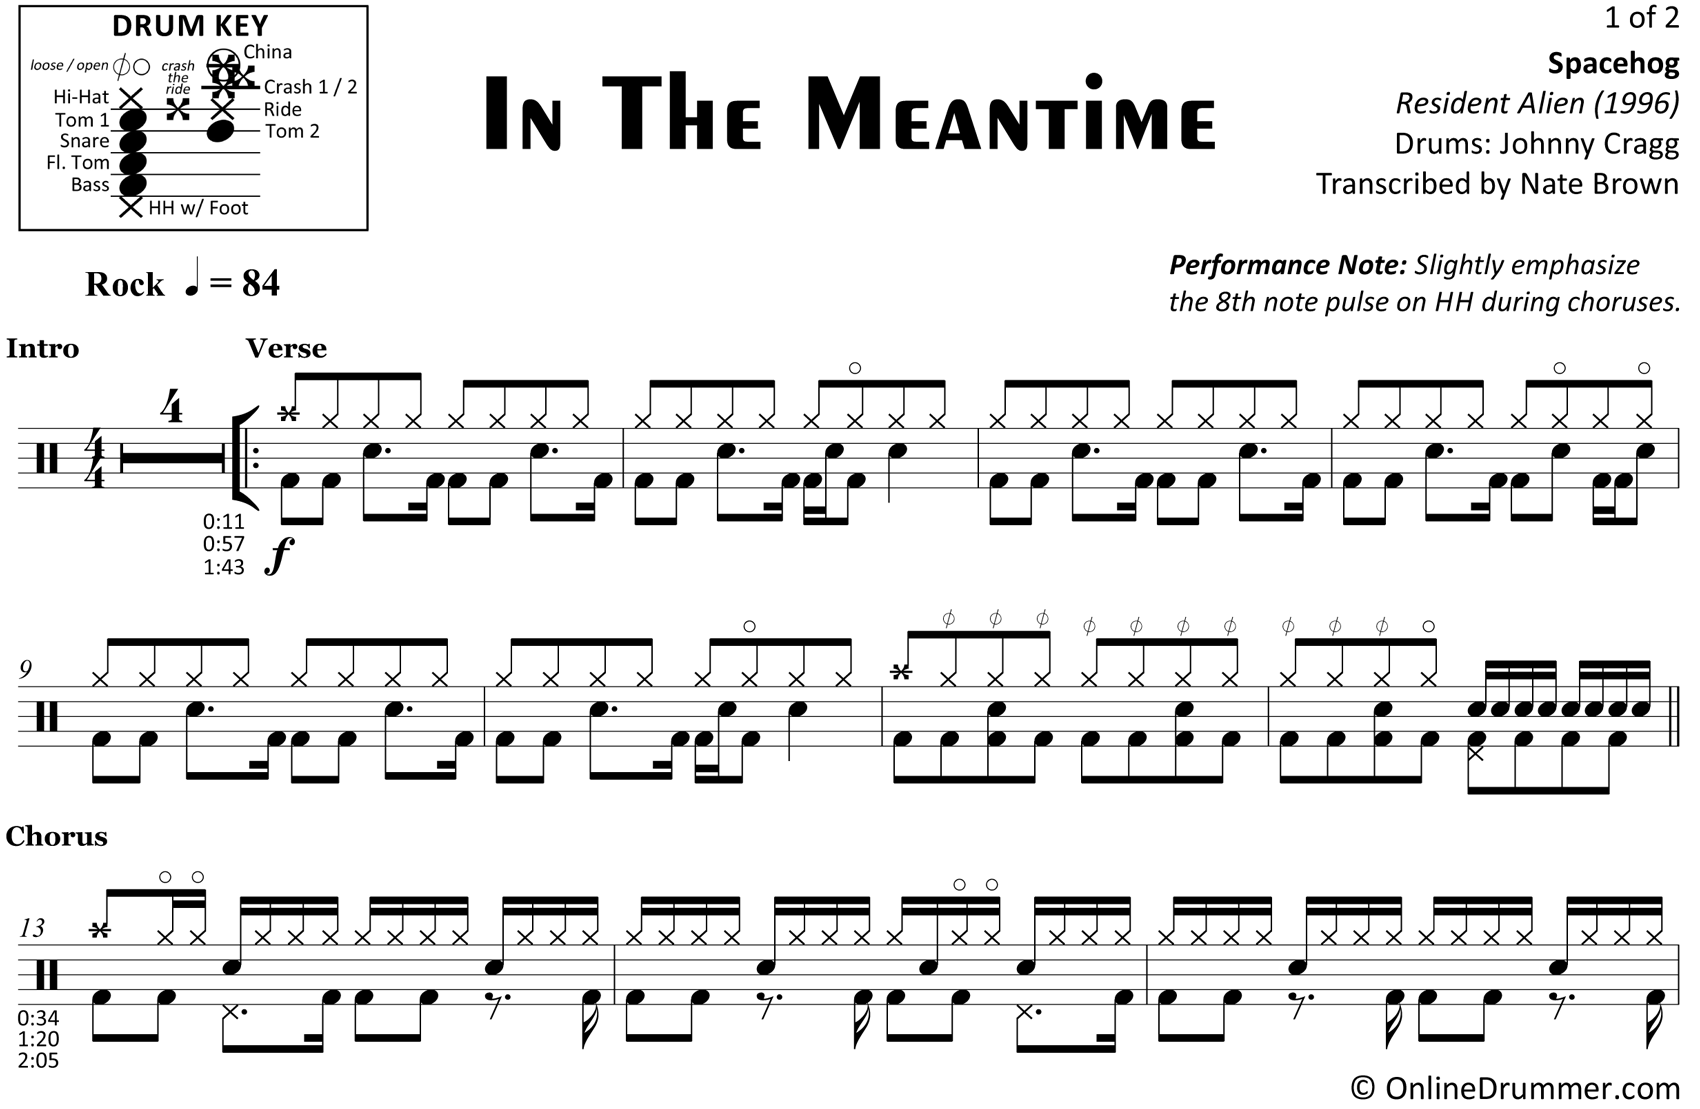 In The Meantime - Spacehog - Drum Sheet Music